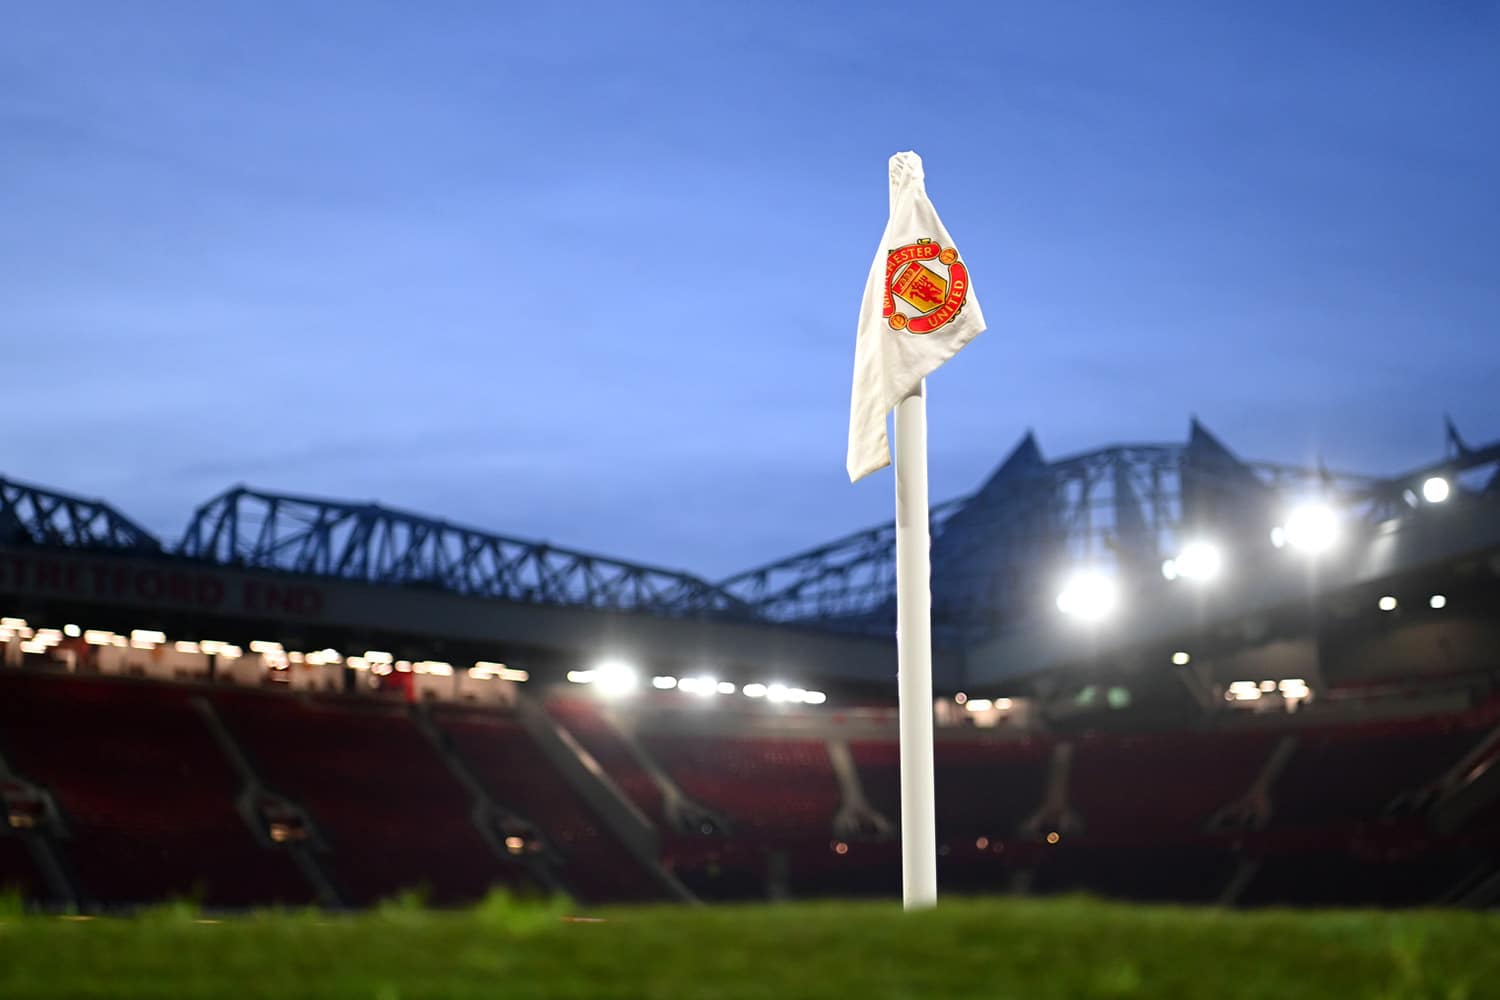 View of a Manchester United corner flag at Old Trafford stadium.